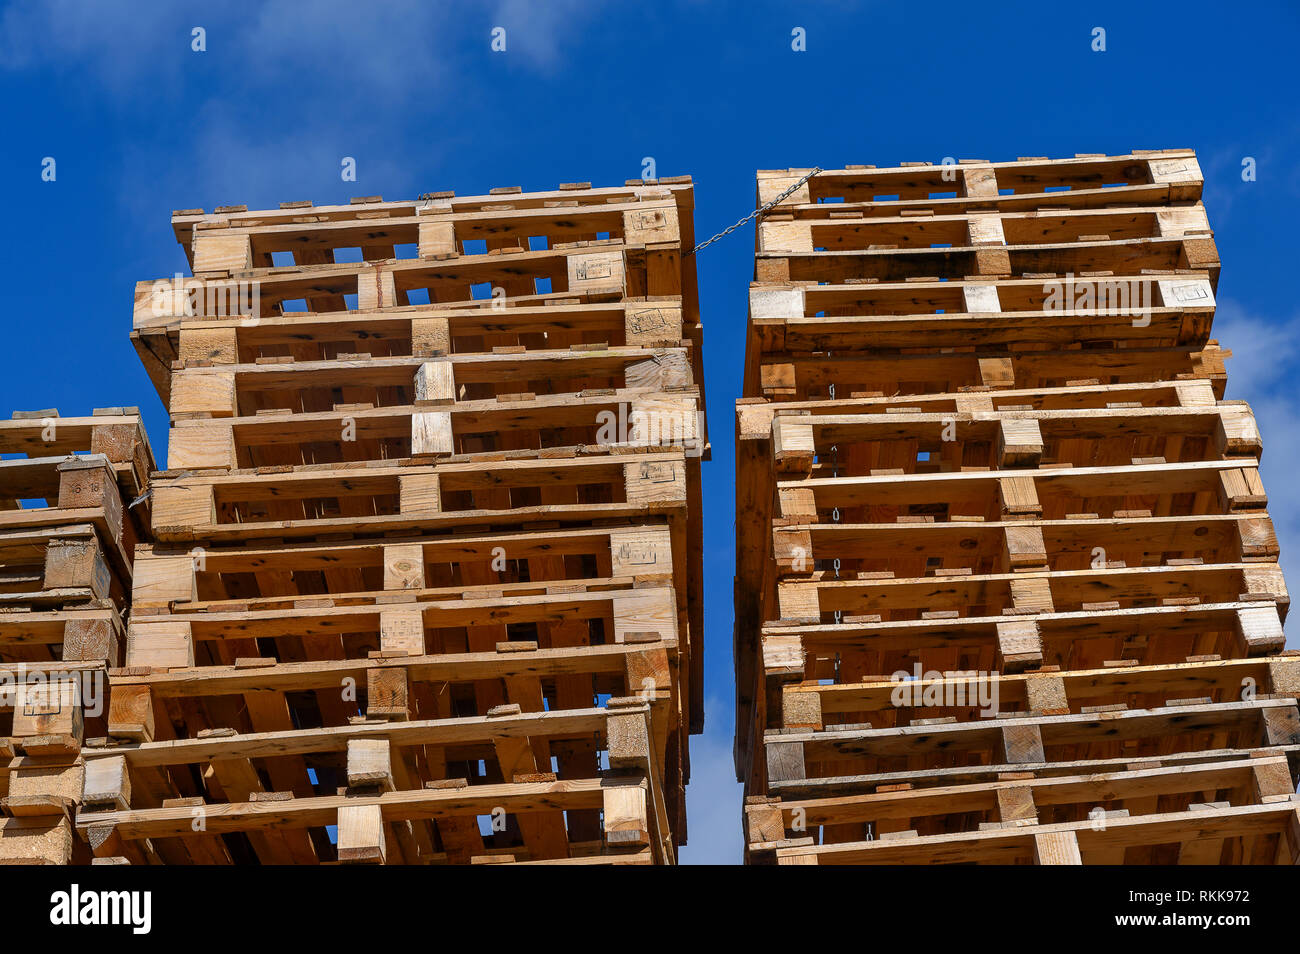 Pallet Outdoor Stock Photos Pallet Outdoor Stock Images Alamy